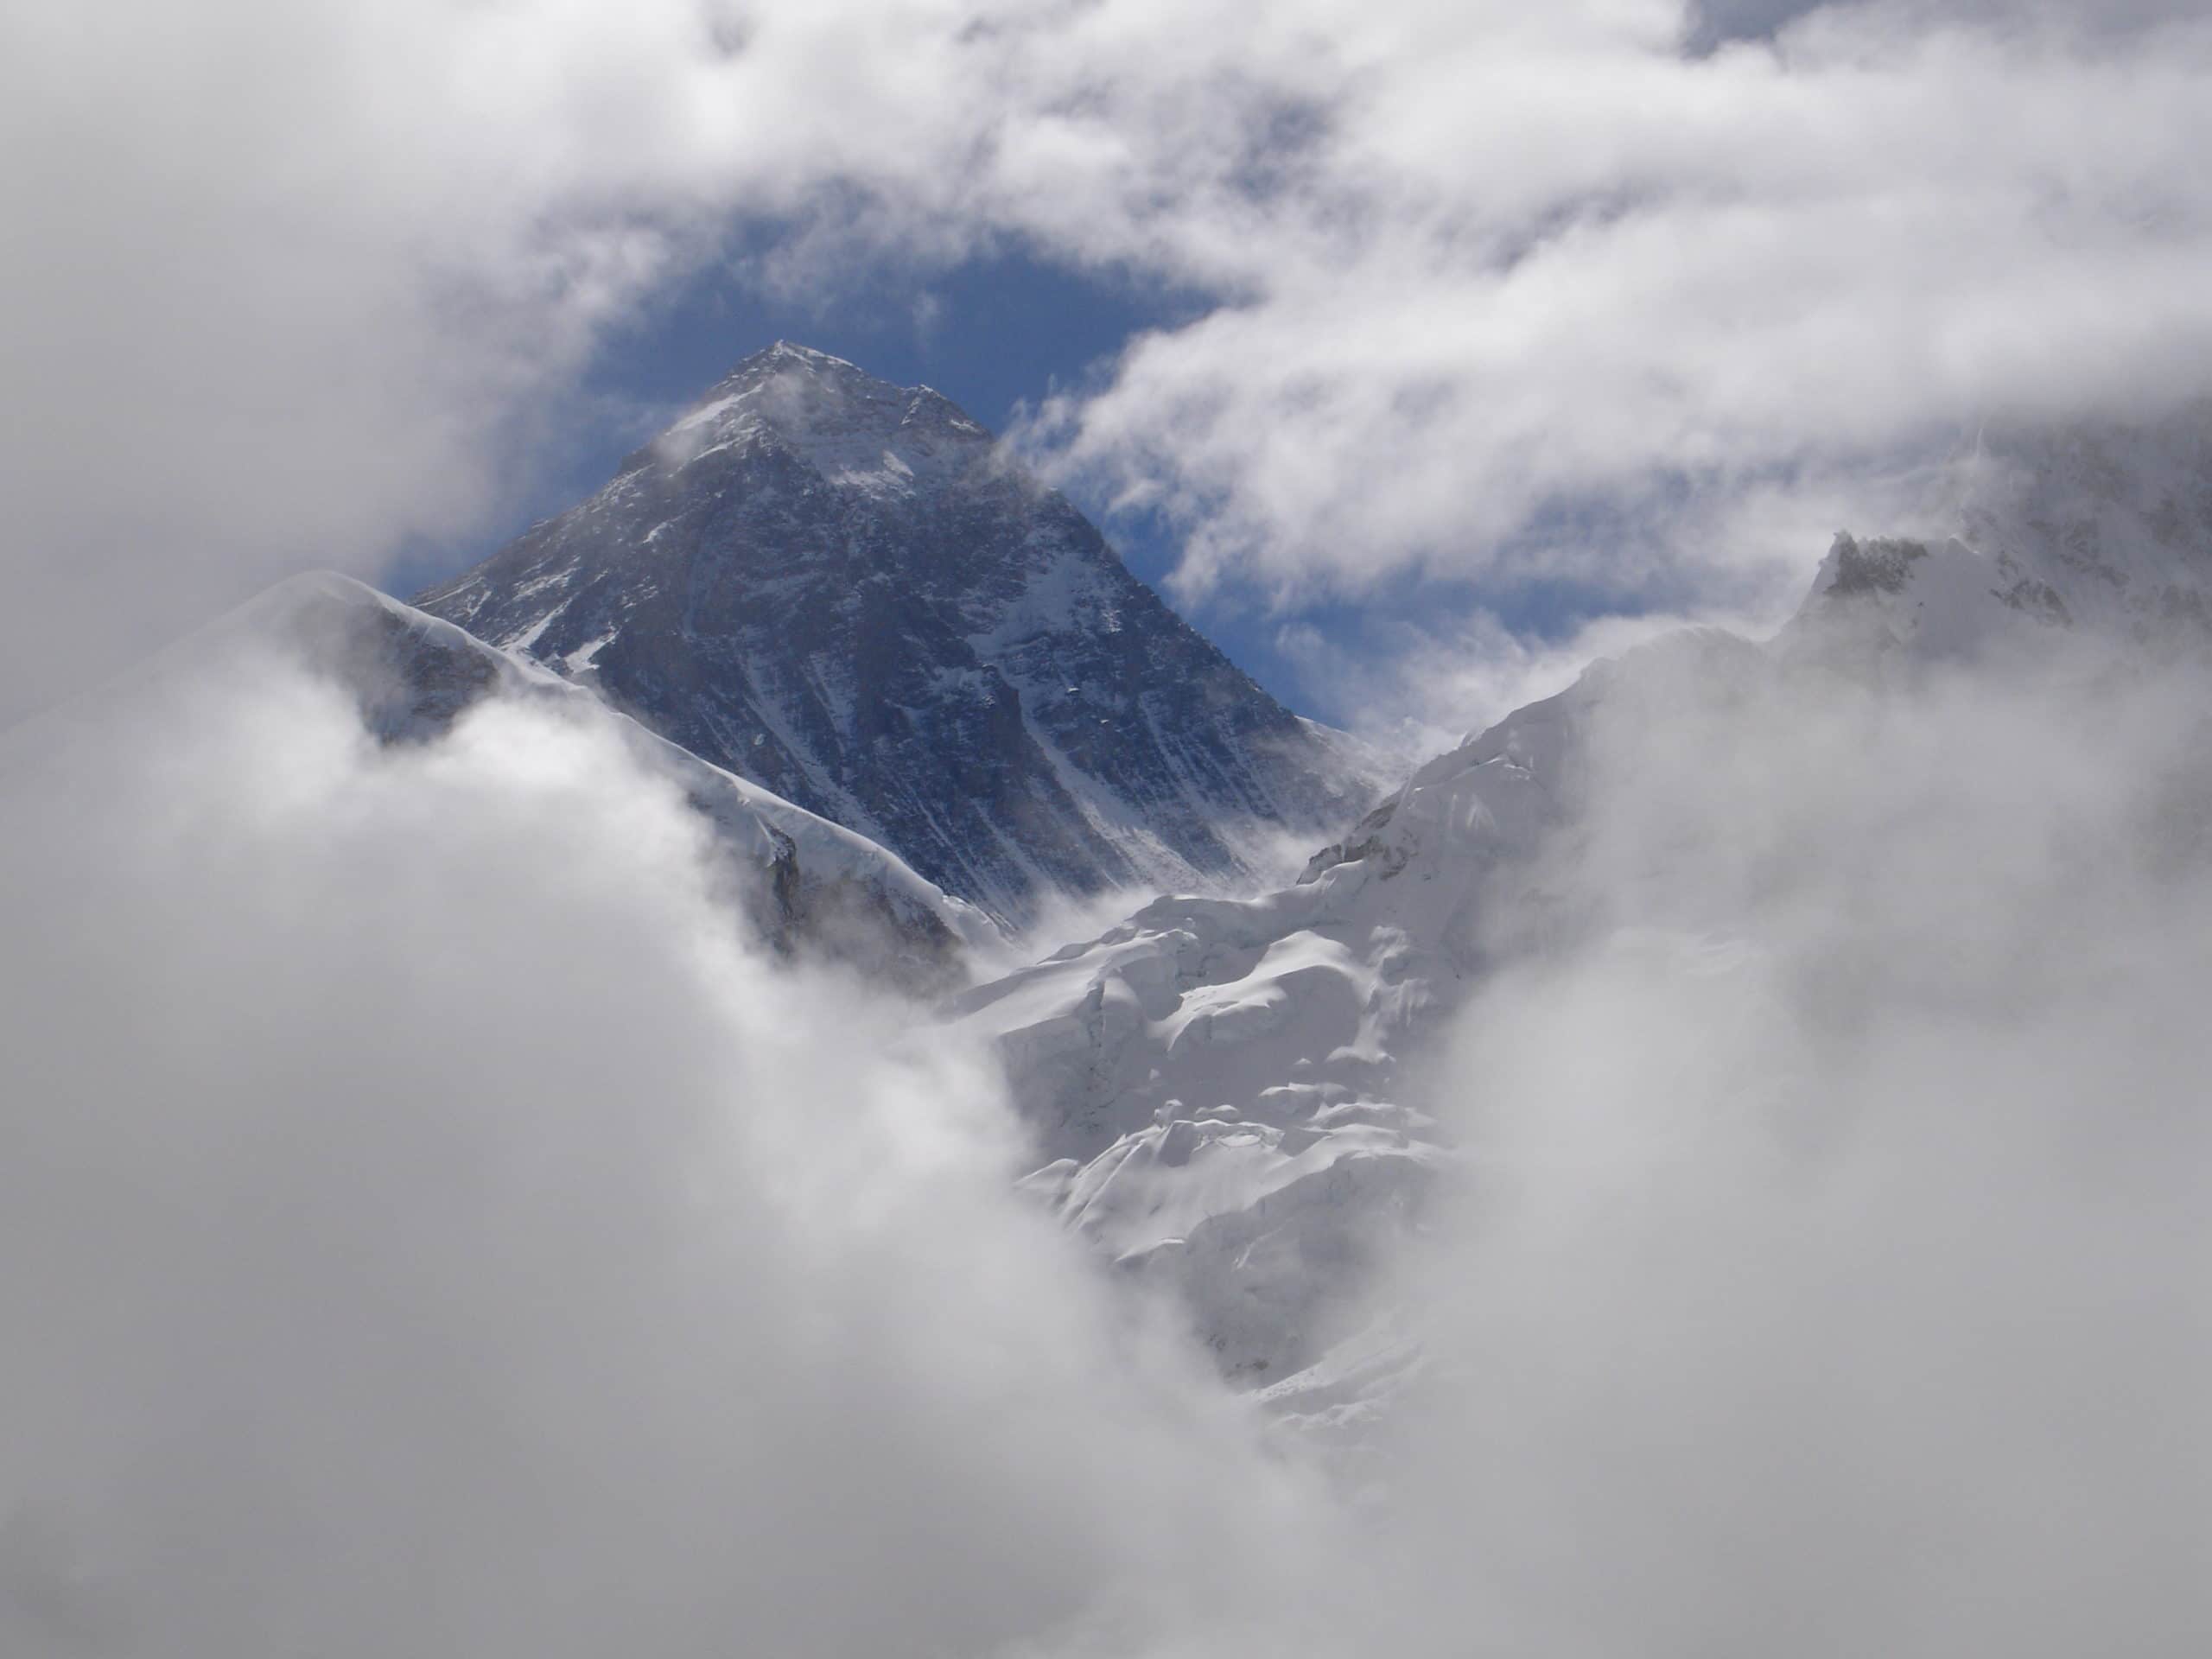 Everest showing up behind the clouds